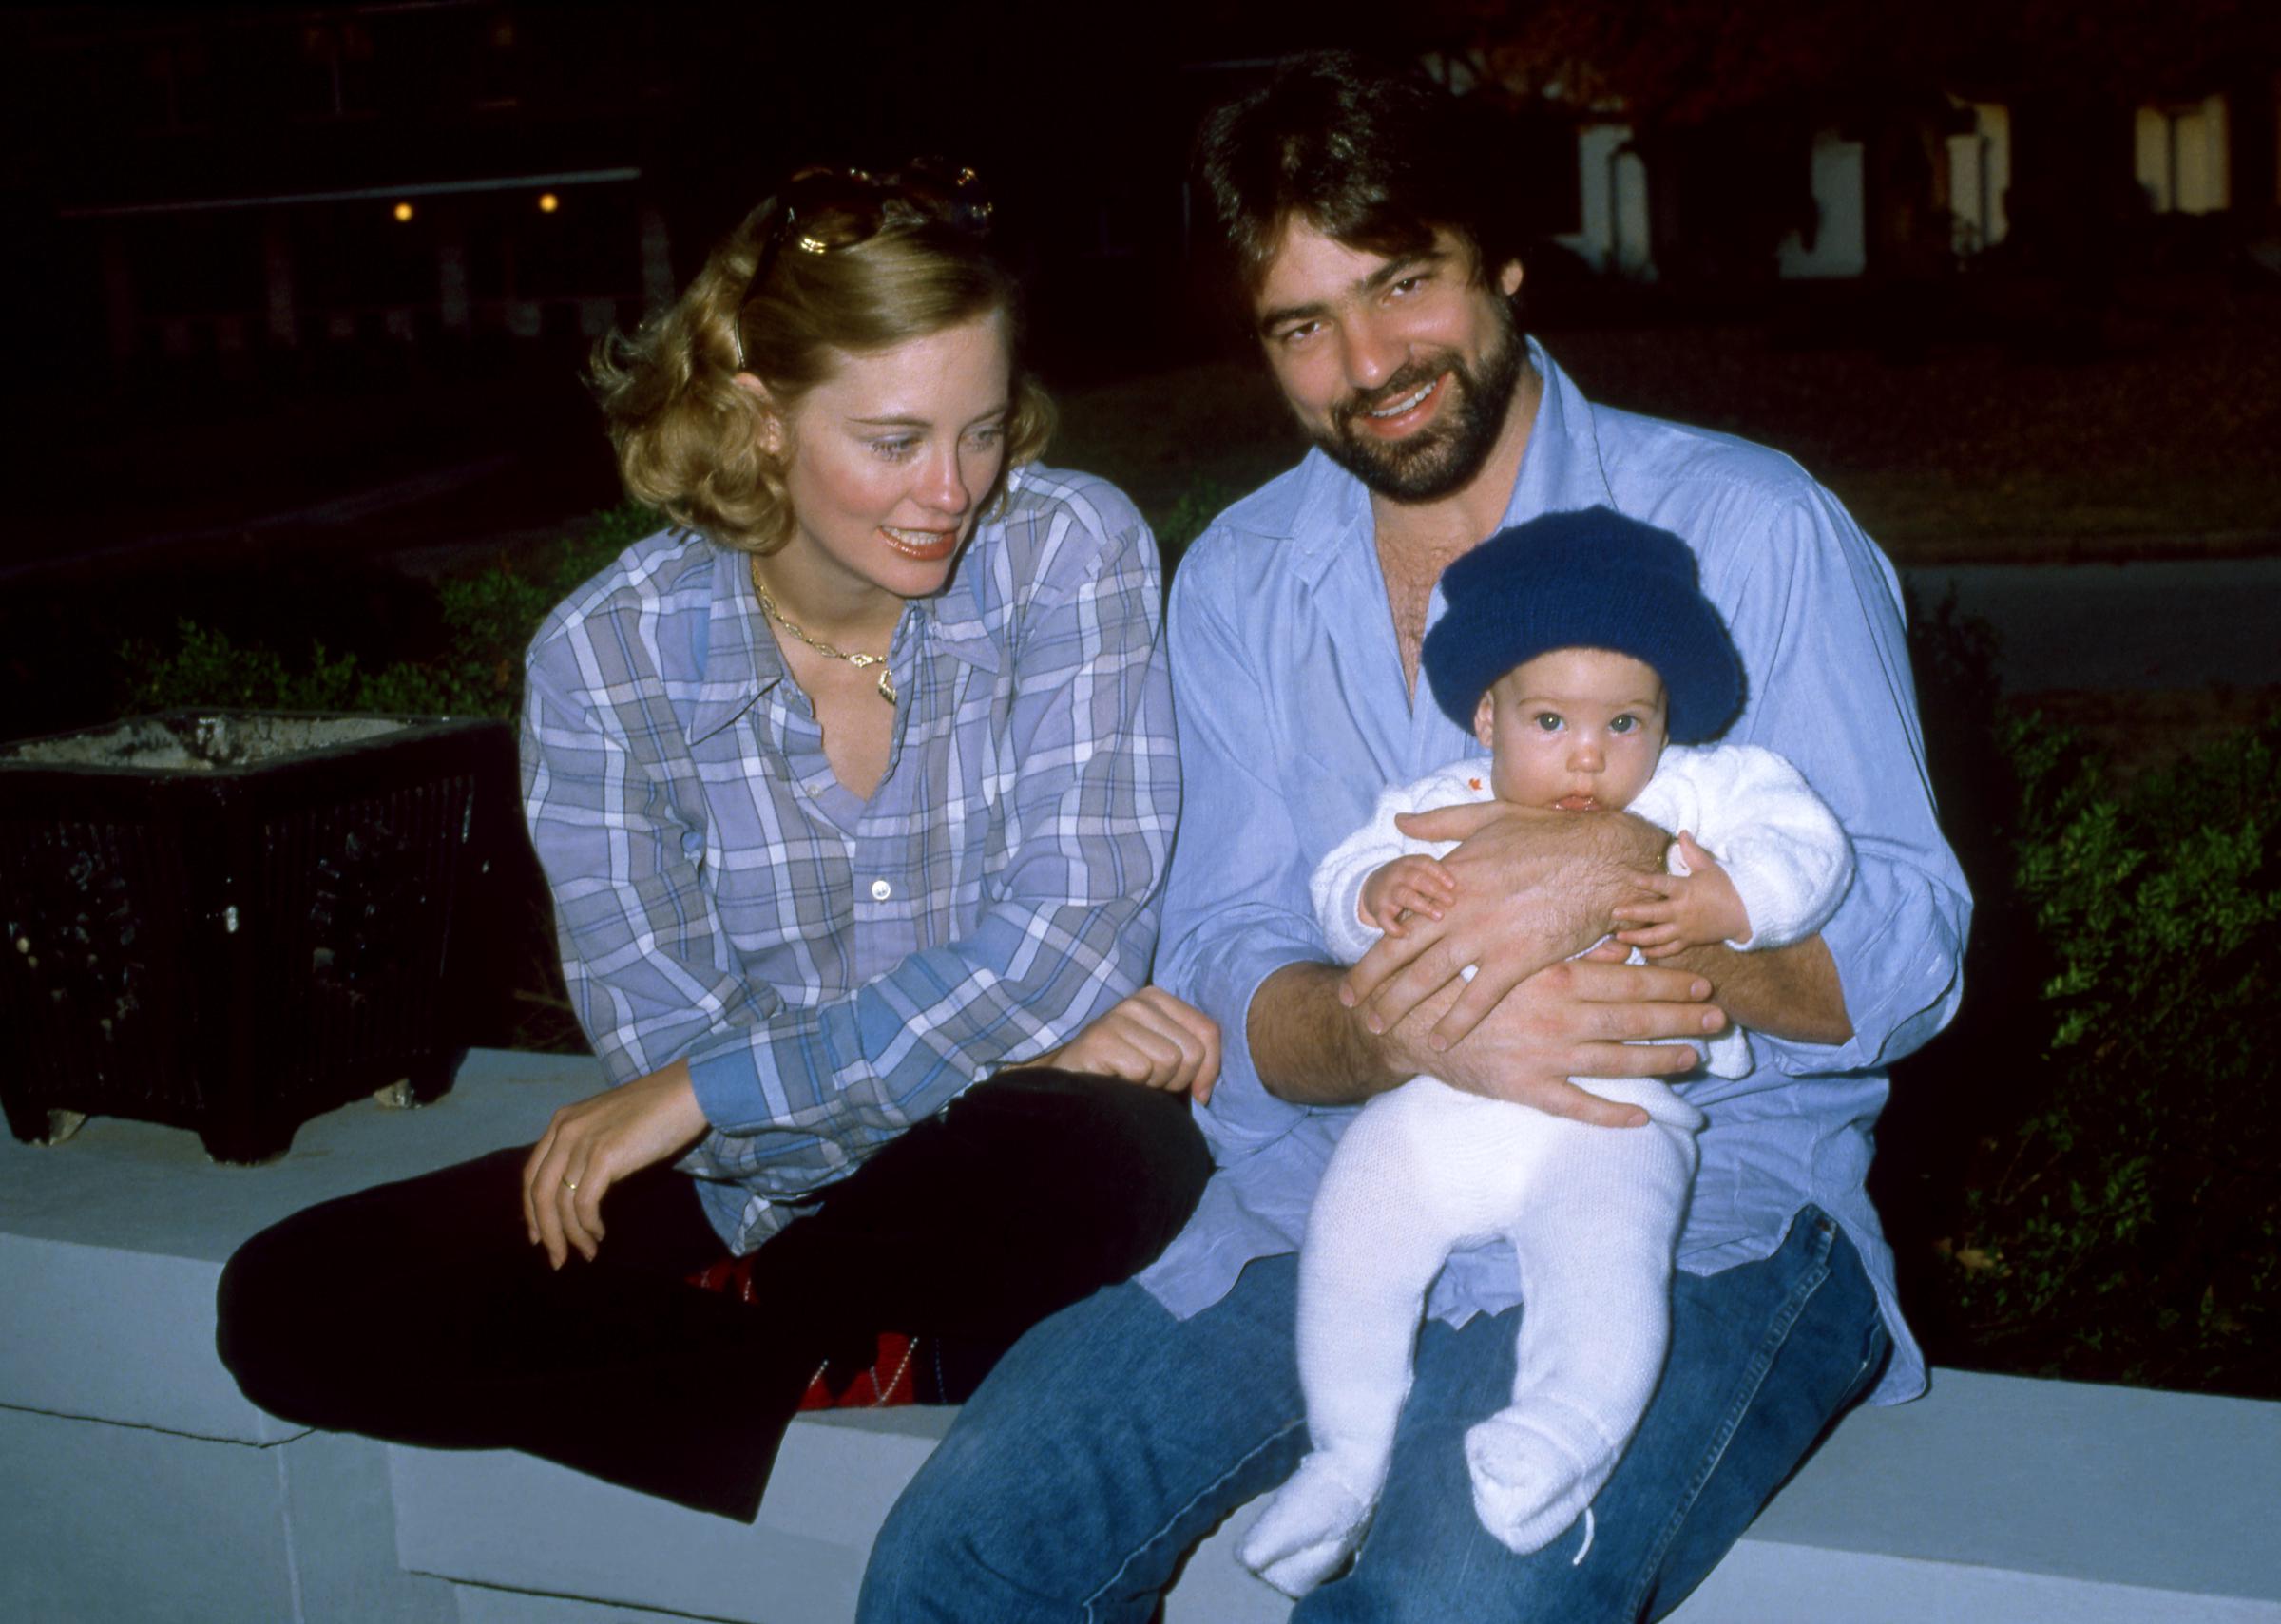 Cybill Shepherd and David Ford with their daughter Clementine Ford in Los Angeles, California, circa 1979. | Source: Getty Images